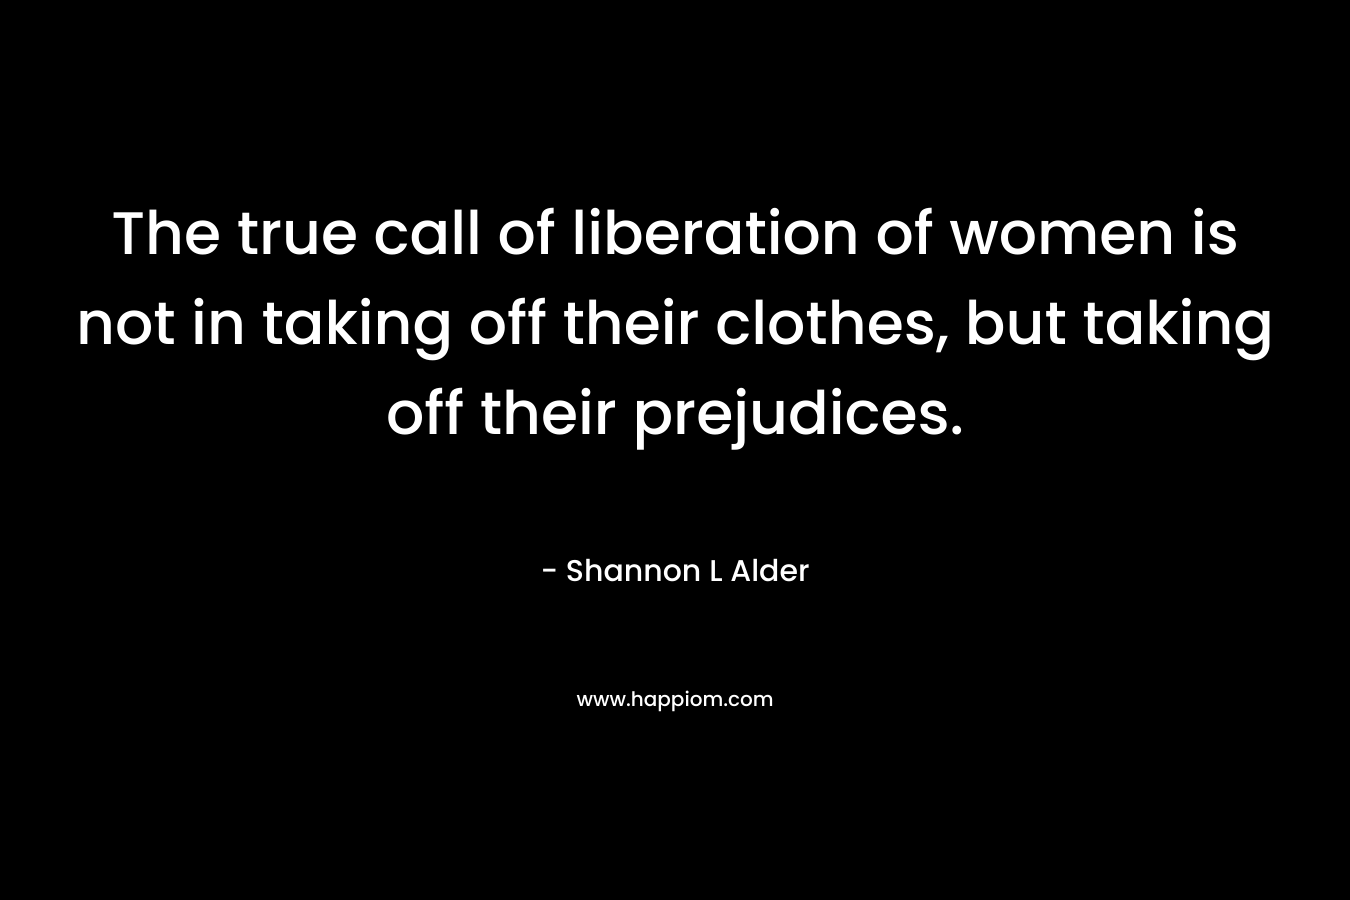 The true call of liberation of women is not in taking off their clothes, but taking off their prejudices.